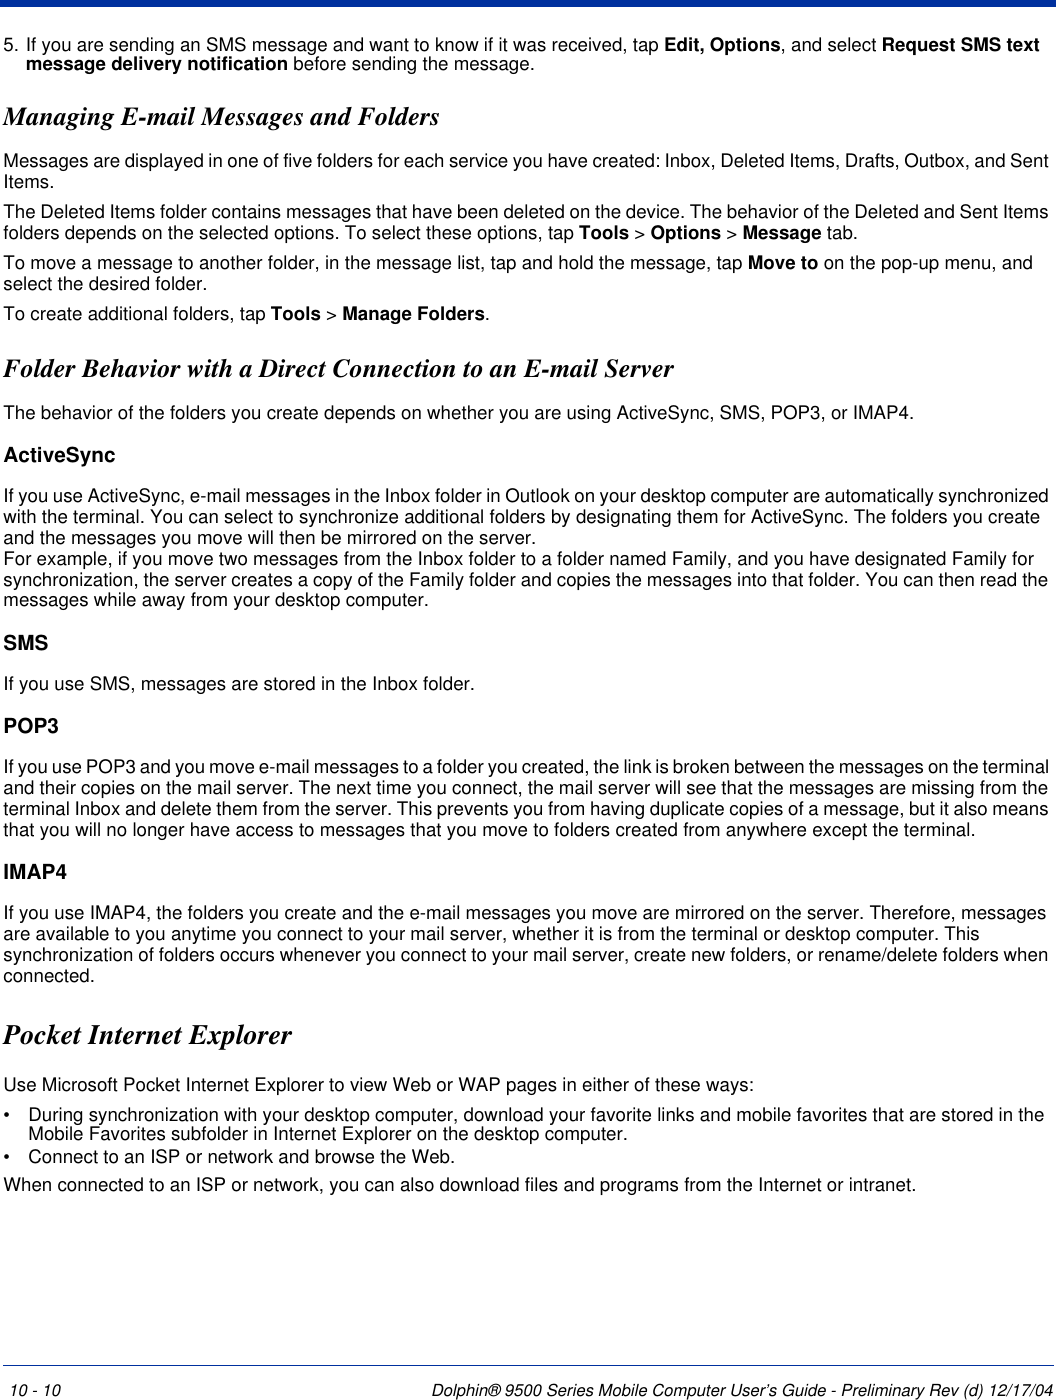 10 - 10 Dolphin® 9500 Series Mobile Computer User’s Guide - Preliminary Rev (d) 12/17/045. If you are sending an SMS message and want to know if it was received, tap Edit, Options, and select Request SMS text message delivery notification before sending the message.Managing E-mail Messages and FoldersMessages are displayed in one of five folders for each service you have created: Inbox, Deleted Items, Drafts, Outbox, and Sent Items. The Deleted Items folder contains messages that have been deleted on the device. The behavior of the Deleted and Sent Items folders depends on the selected options. To select these options, tap Tools &gt; Options &gt; Message tab.To move a message to another folder, in the message list, tap and hold the message, tap Move to on the pop-up menu, and select the desired folder.To create additional folders, tap Tools &gt; Manage Folders. Folder Behavior with a Direct Connection to an E-mail ServerThe behavior of the folders you create depends on whether you are using ActiveSync, SMS, POP3, or IMAP4. ActiveSyncIf you use ActiveSync, e-mail messages in the Inbox folder in Outlook on your desktop computer are automatically synchronized with the terminal. You can select to synchronize additional folders by designating them for ActiveSync. The folders you create and the messages you move will then be mirrored on the server.  For example, if you move two messages from the Inbox folder to a folder named Family, and you have designated Family for synchronization, the server creates a copy of the Family folder and copies the messages into that folder. You can then read the messages while away from your desktop computer.SMSIf you use SMS, messages are stored in the Inbox folder. POP3If you use POP3 and you move e-mail messages to a folder you created, the link is broken between the messages on the terminal and their copies on the mail server. The next time you connect, the mail server will see that the messages are missing from the terminal Inbox and delete them from the server. This prevents you from having duplicate copies of a message, but it also means that you will no longer have access to messages that you move to folders created from anywhere except the terminal. IMAP4If you use IMAP4, the folders you create and the e-mail messages you move are mirrored on the server. Therefore, messages are available to you anytime you connect to your mail server, whether it is from the terminal or desktop computer. This synchronization of folders occurs whenever you connect to your mail server, create new folders, or rename/delete folders when connected. Pocket Internet Explorer Use Microsoft Pocket Internet Explorer to view Web or WAP pages in either of these ways:•           During synchronization with your desktop computer, download your favorite links and mobile favorites that are stored in the Mobile Favorites subfolder in Internet Explorer on the desktop computer.•           Connect to an ISP or network and browse the Web. When connected to an ISP or network, you can also download files and programs from the Internet or intranet.